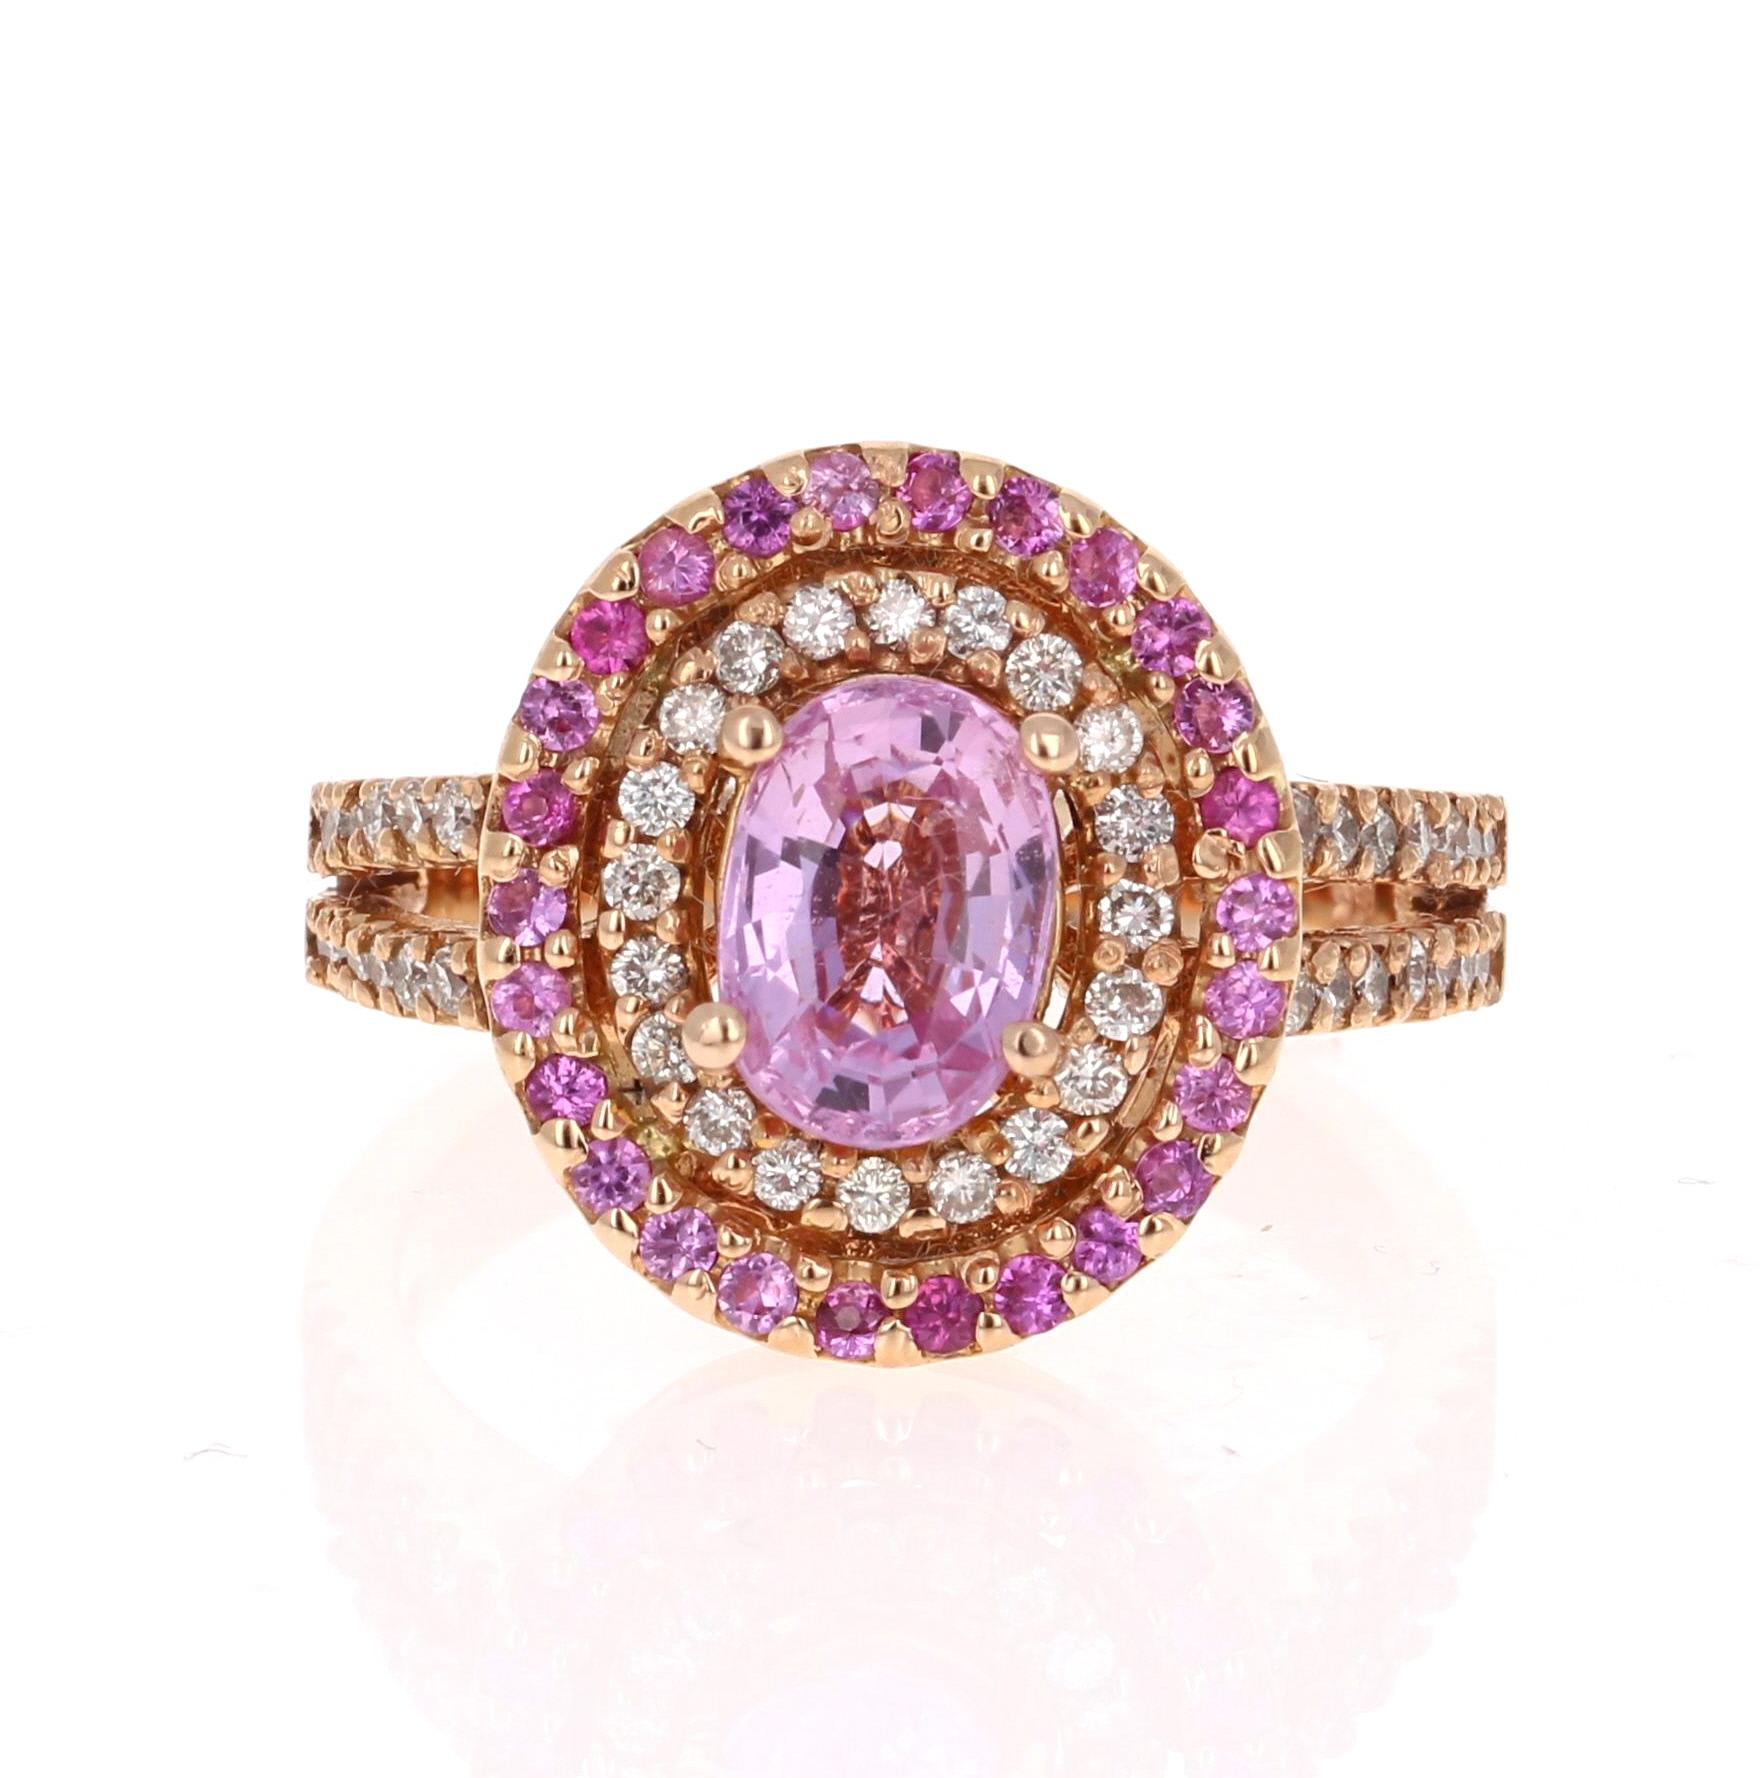 Breathtaking Pink Sapphire Diamond Ring with a beautiful split shank setting! Can be the most unique Engagement or Cocktail Ring! 

The center Oval Cut Pink Sapphire is 1.90 Carats and is surrounded by a double halo. One of the halos has 48 Round